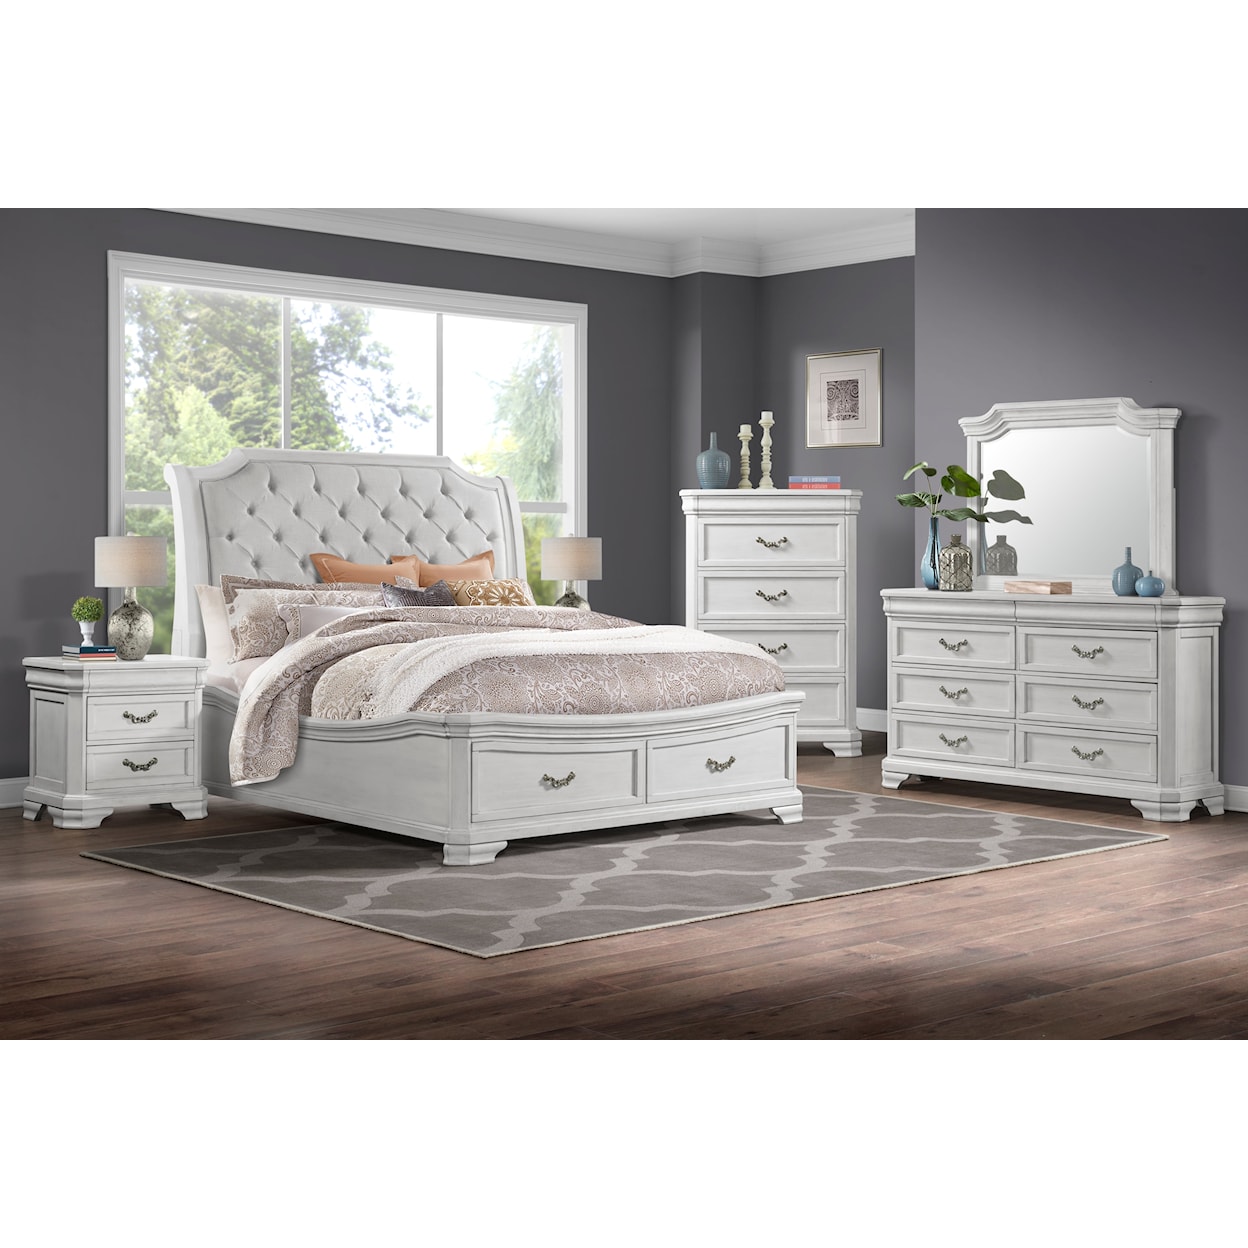 New Classic Furniture Lyndhurst Queen Upholstered Bed